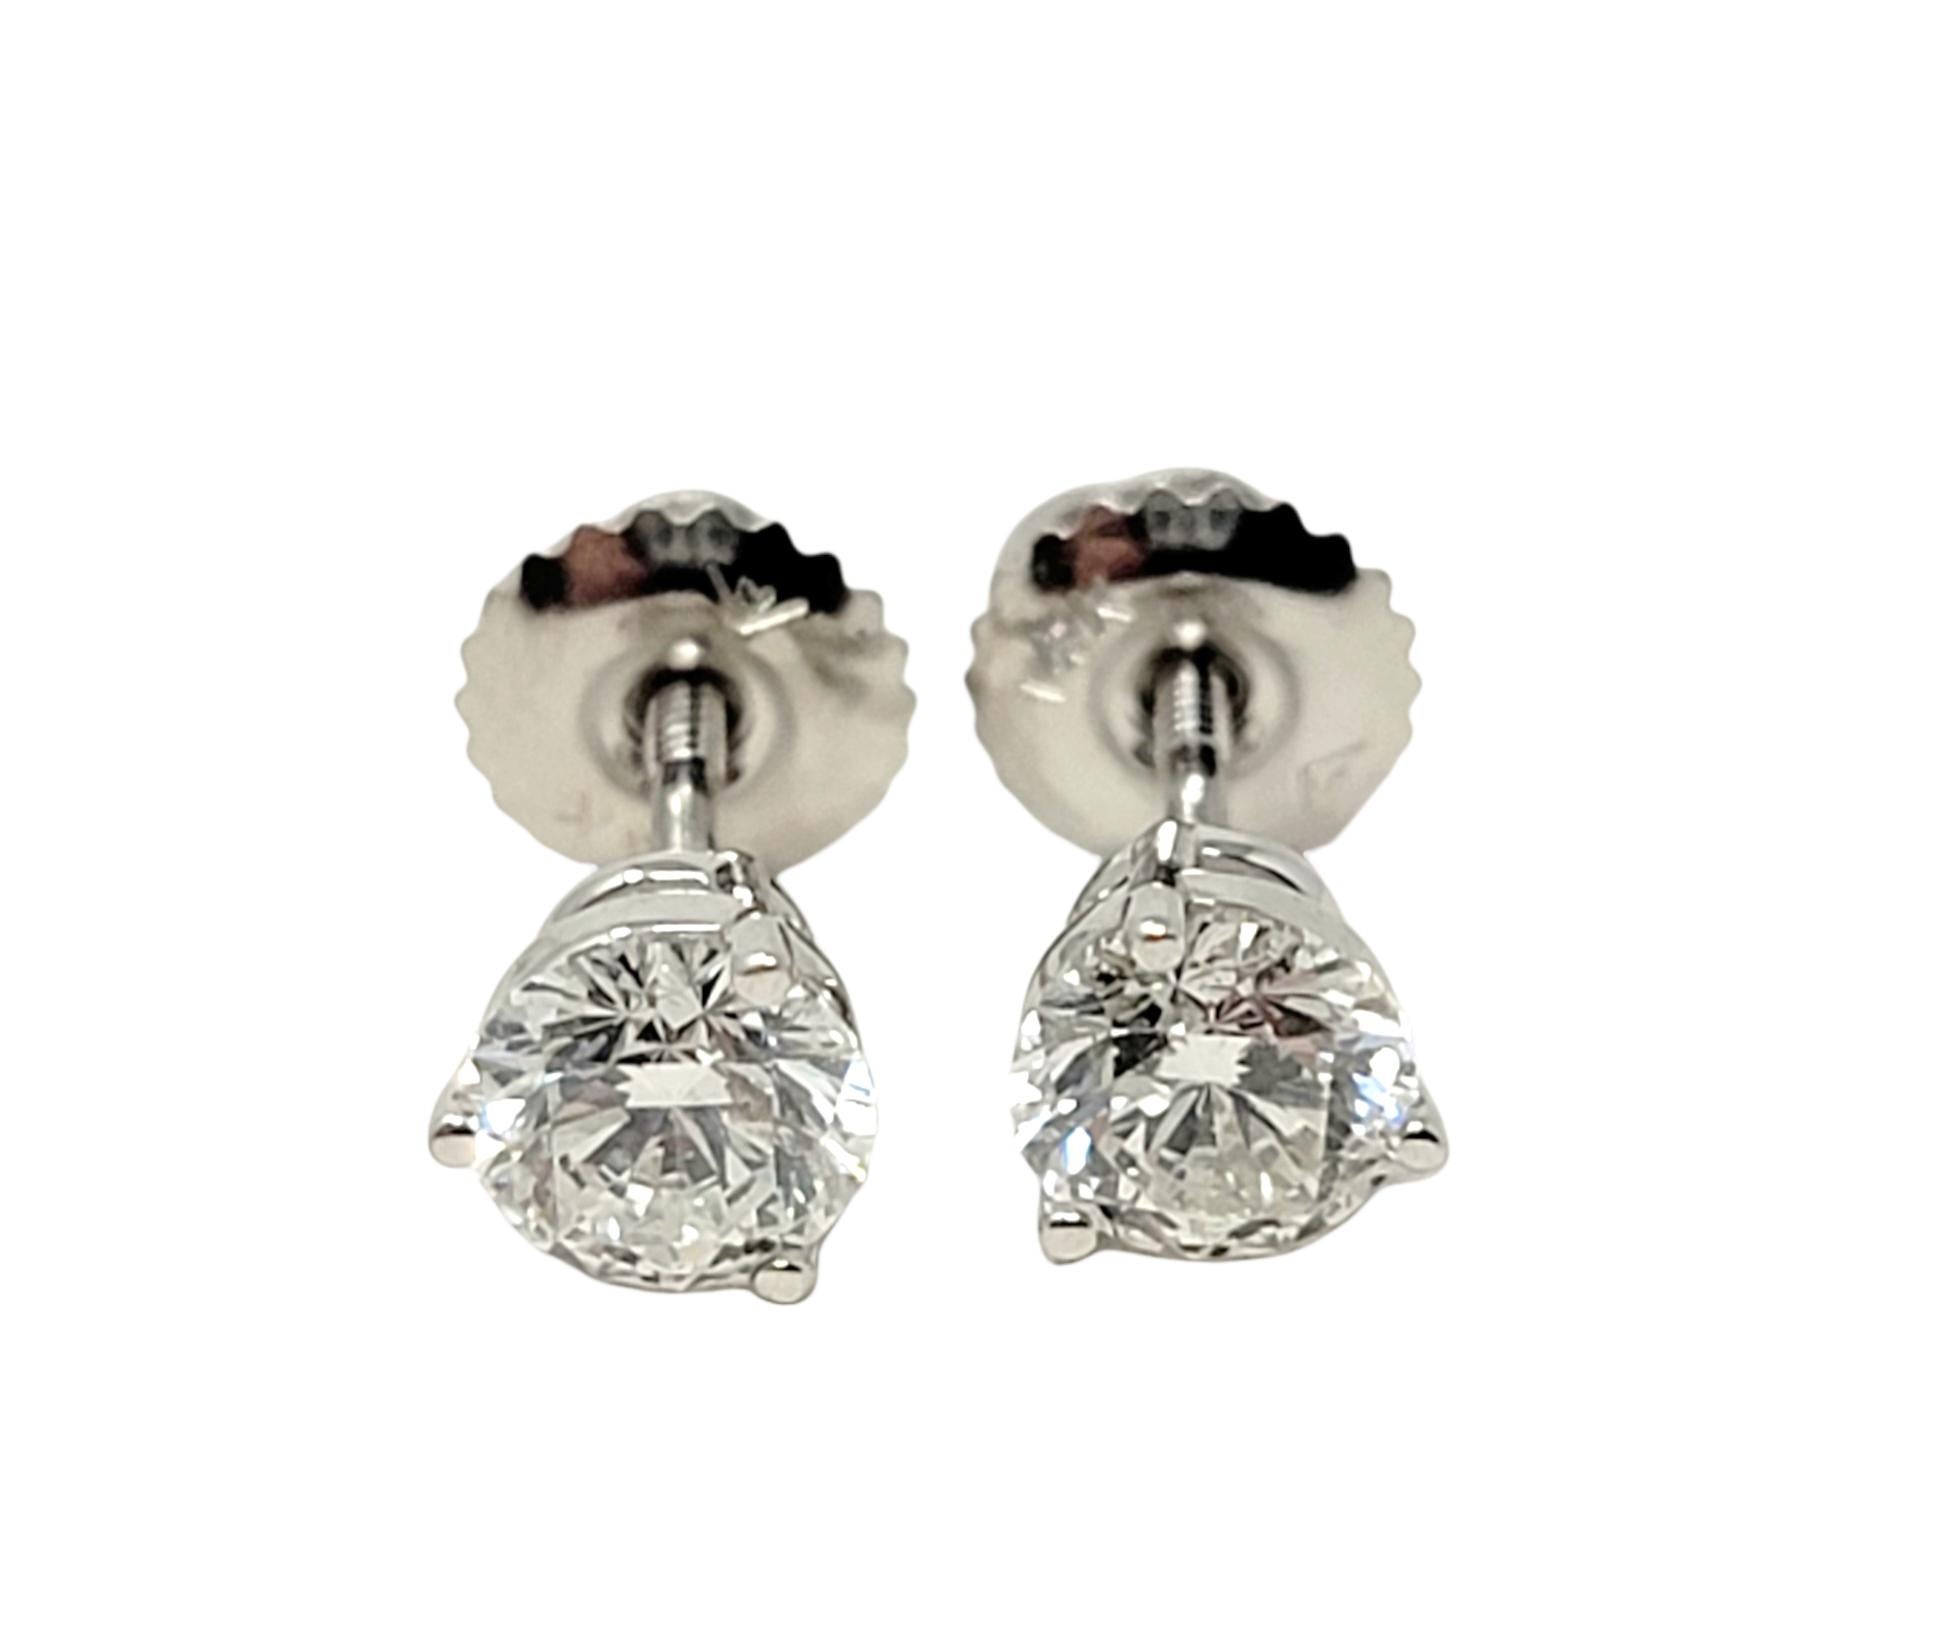 .94 Carats Total Round Leo Diamond Stud Earrings in White Gold 3 Prong Setting For Sale 6